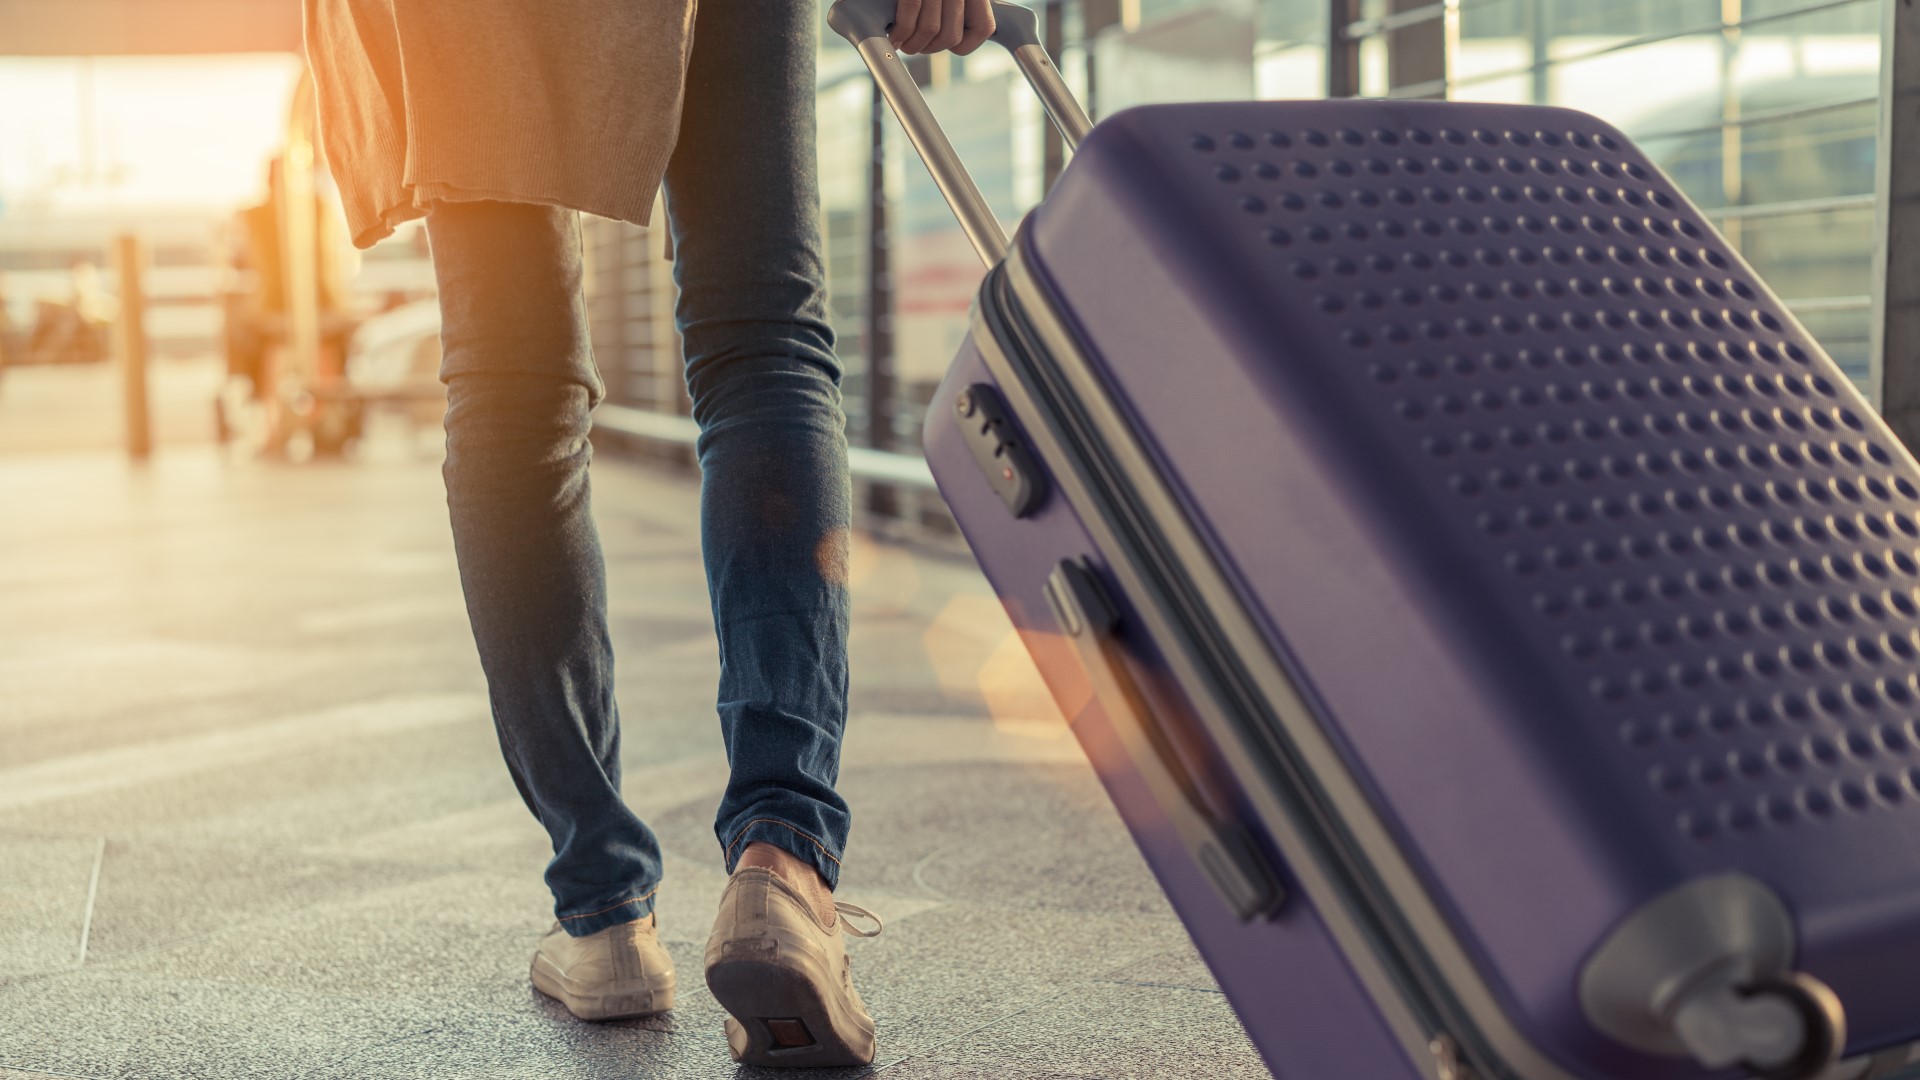 Here are reasons why travelers should consider the extra cost, especially as restrictions change during the coronavirus pandemic.